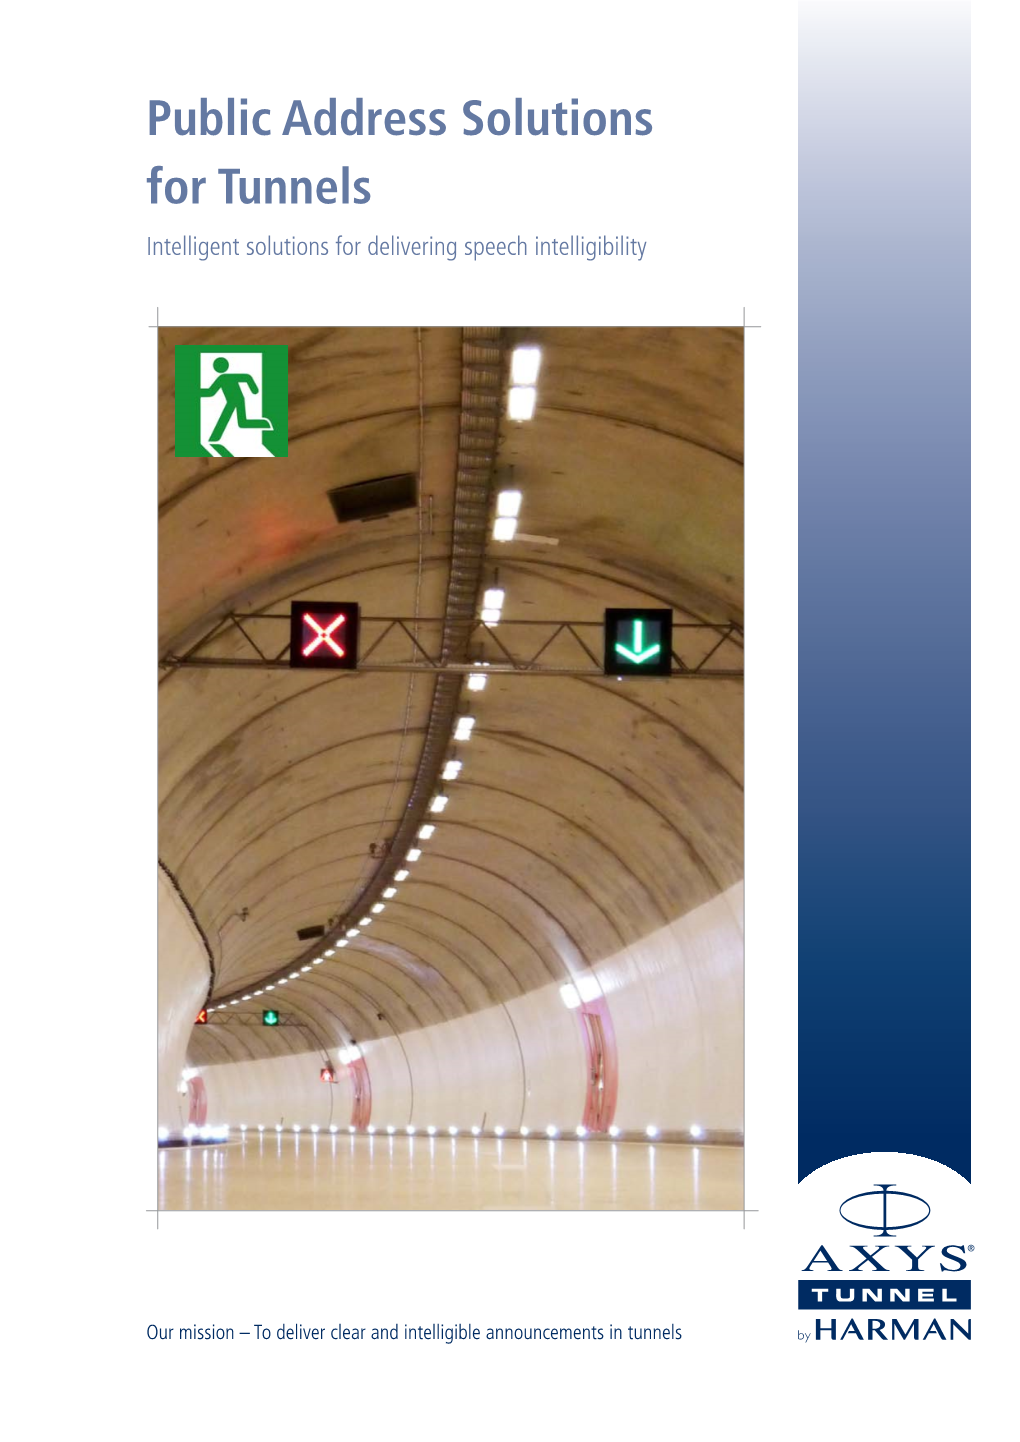 Public Address Solutions for Tunnels Intelligent Solutions for Delivering Speech Intelligibility